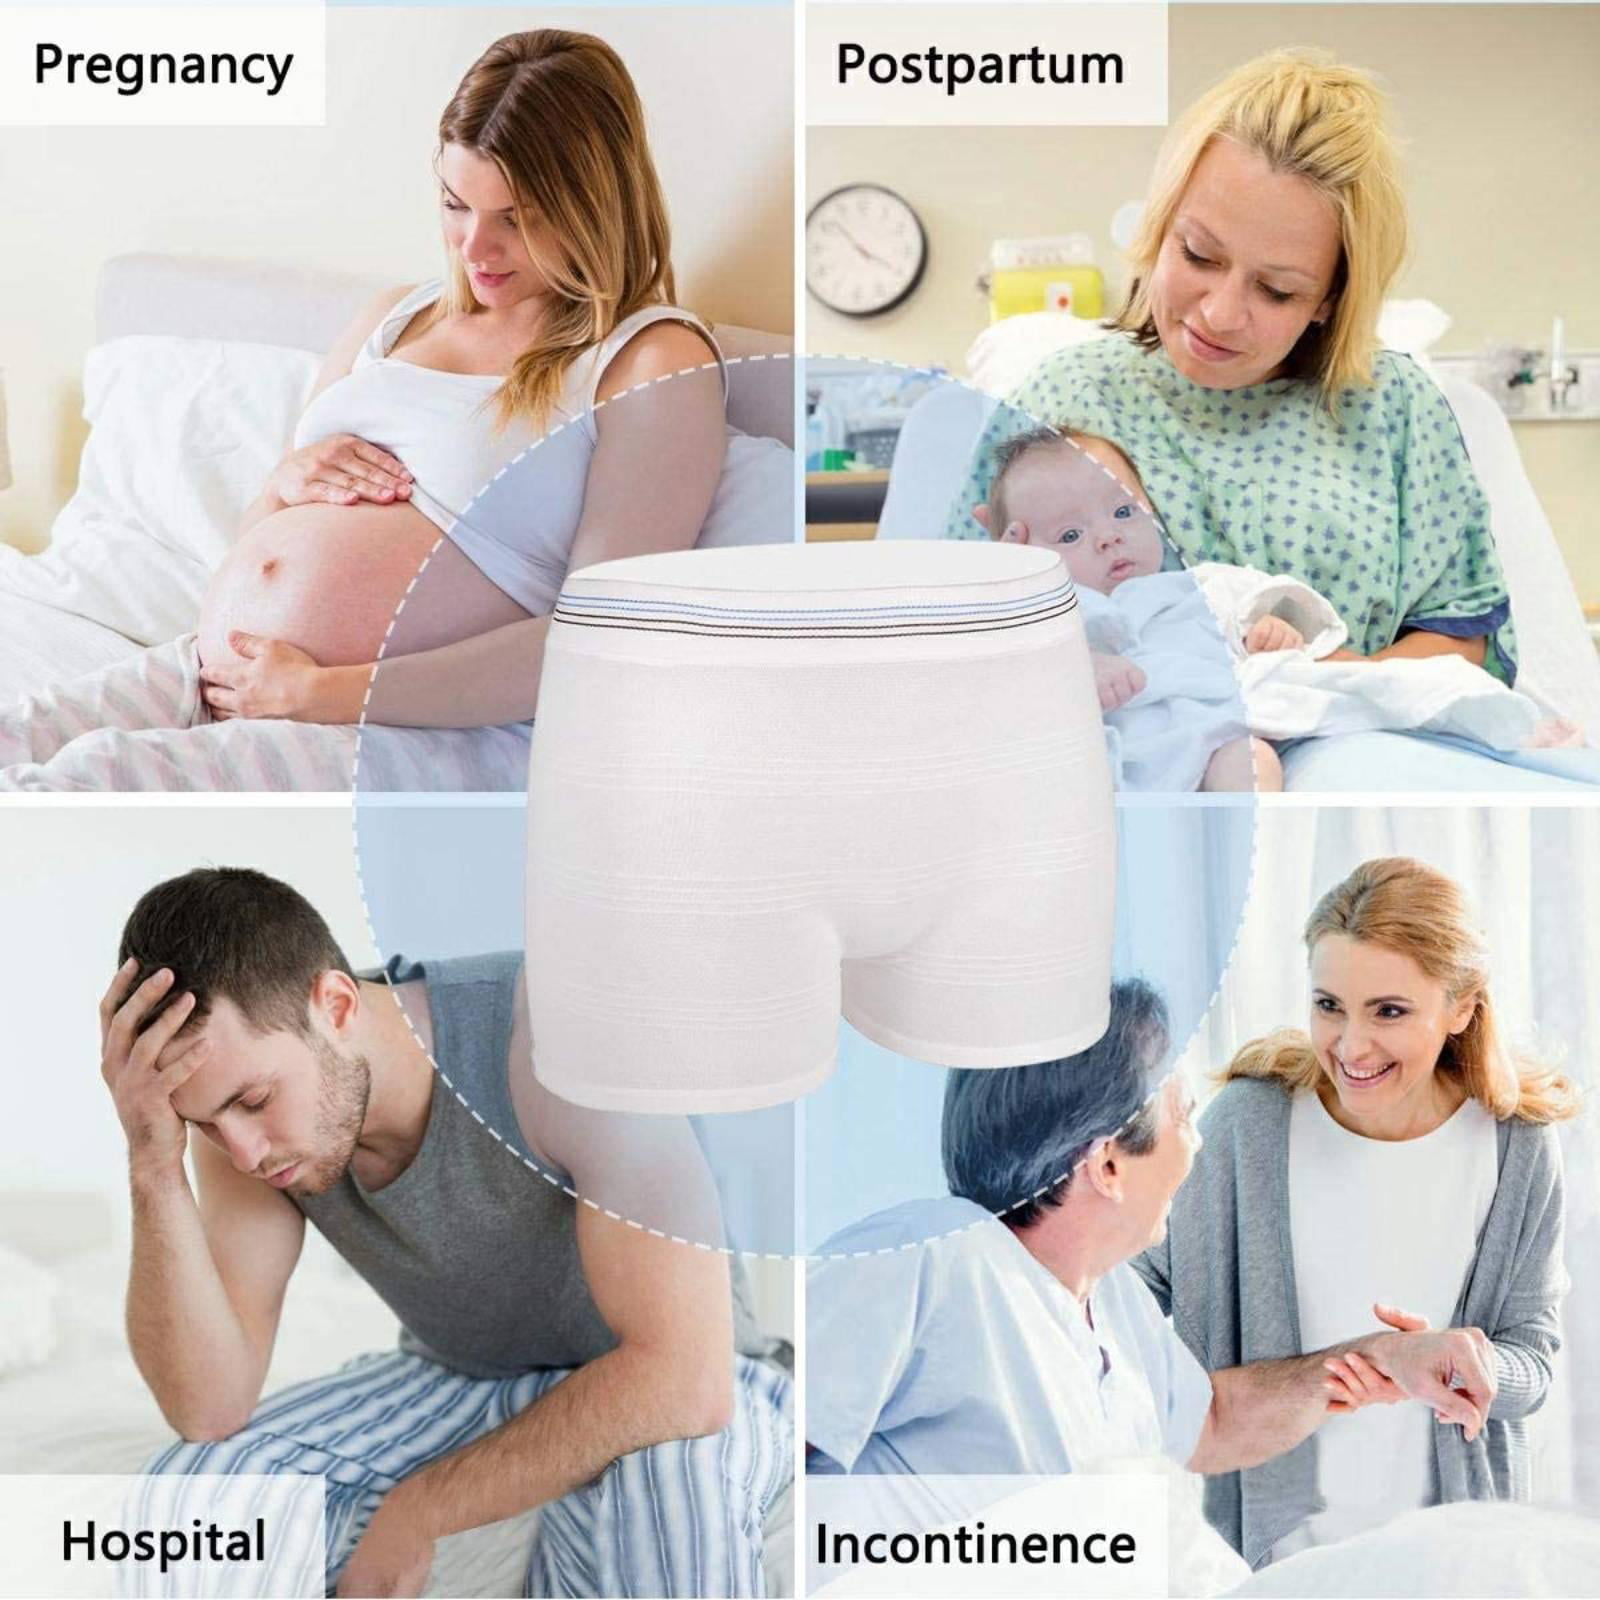 JUNFAN Washable Mesh Pants 4 Pack Disposable Postpartum Underwear Panties  for Women Hospital Provide Surgical Recovery,Incontinence, Maternity